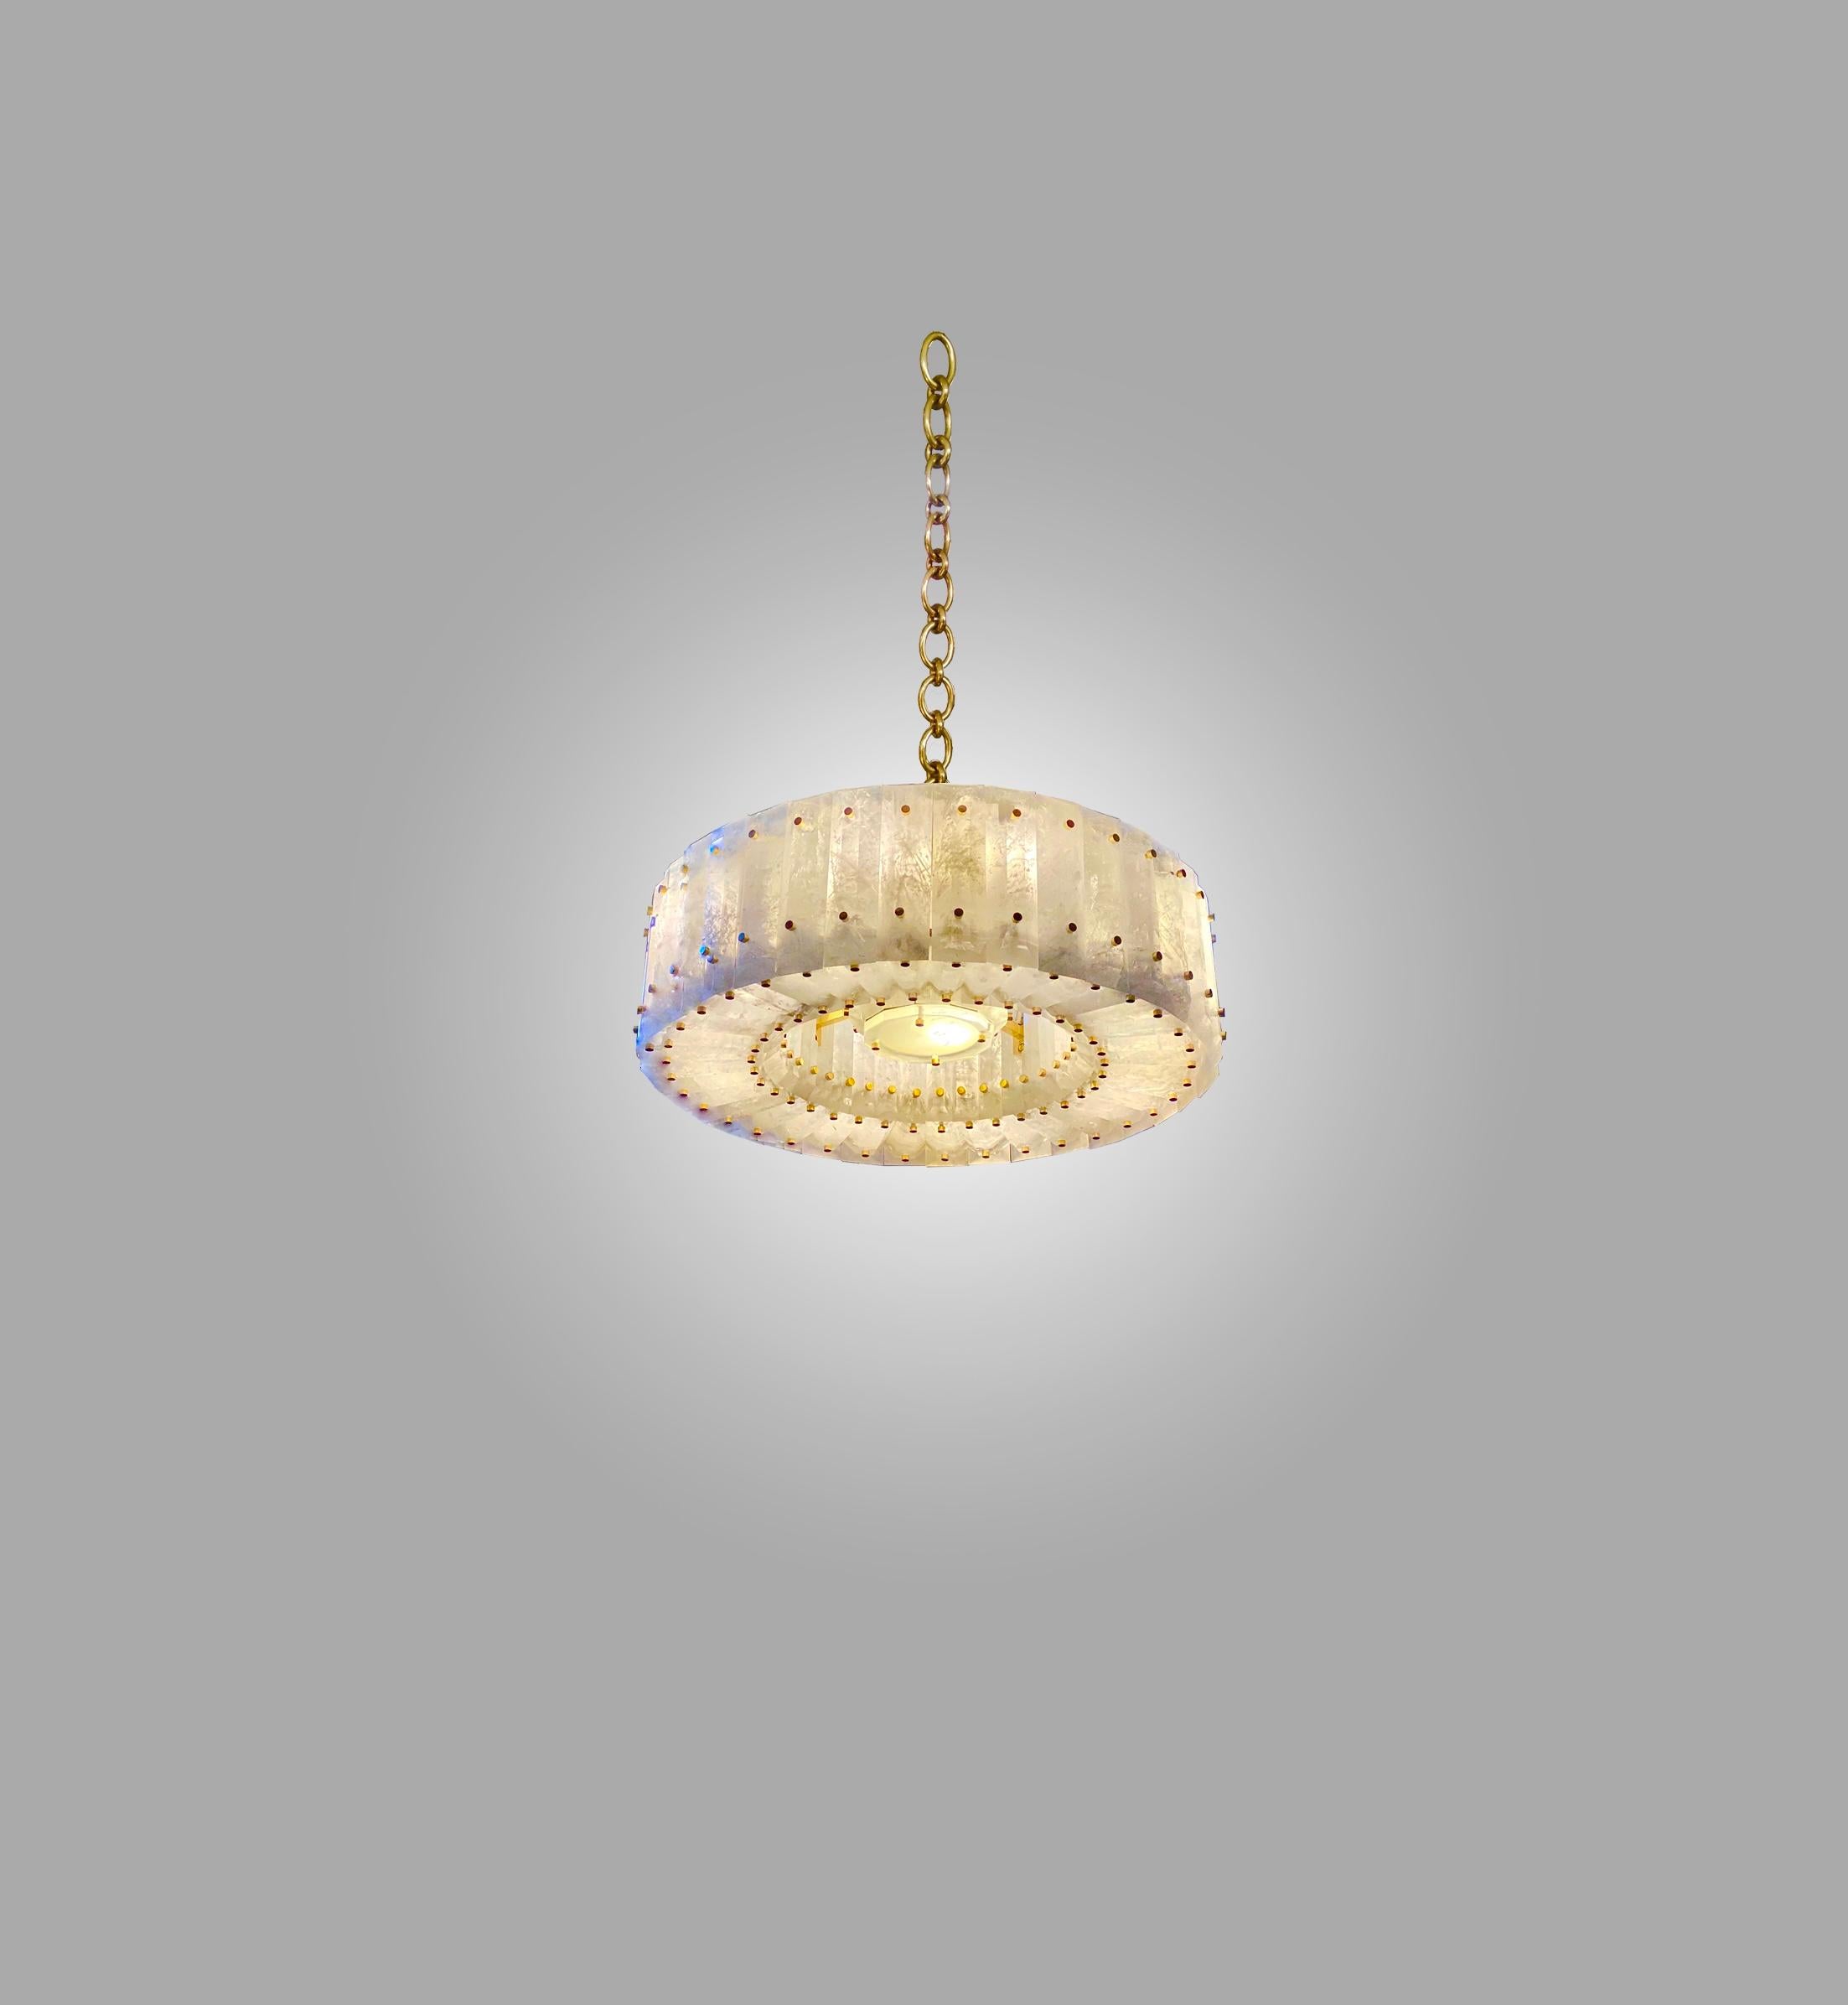 Round rock crystal chandelier with center section and brass nail decoration. Finely carved, multi-faceted rock crystal panels installed around the circumference of the circle. Hung from a finely cast polished brass chain. 
Overall height can be